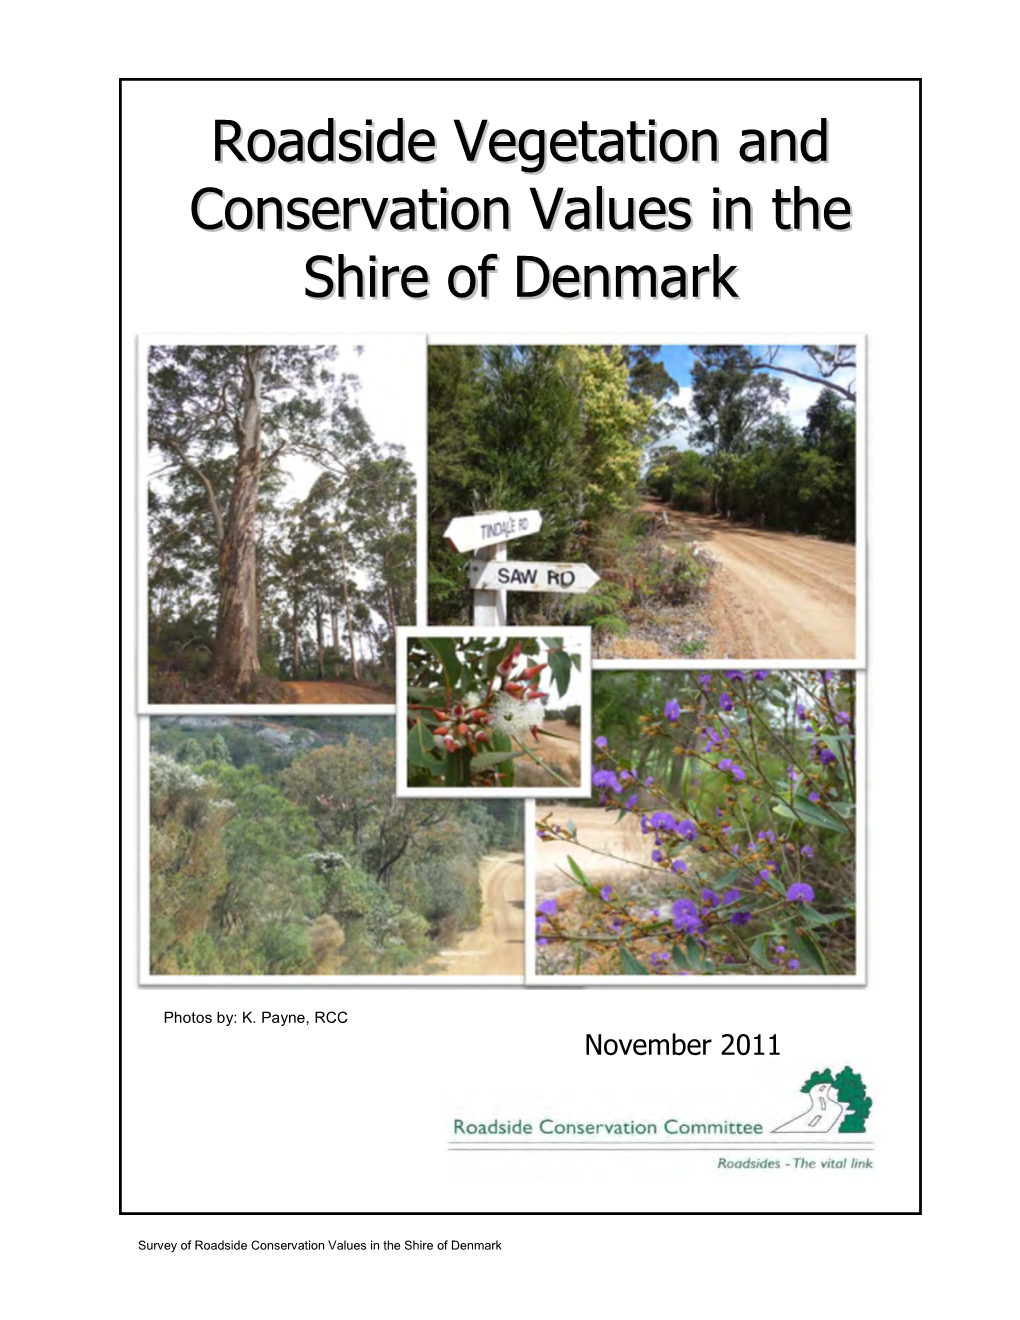 Roadside Vegetation and Conservation Values in the Shire of Denmark